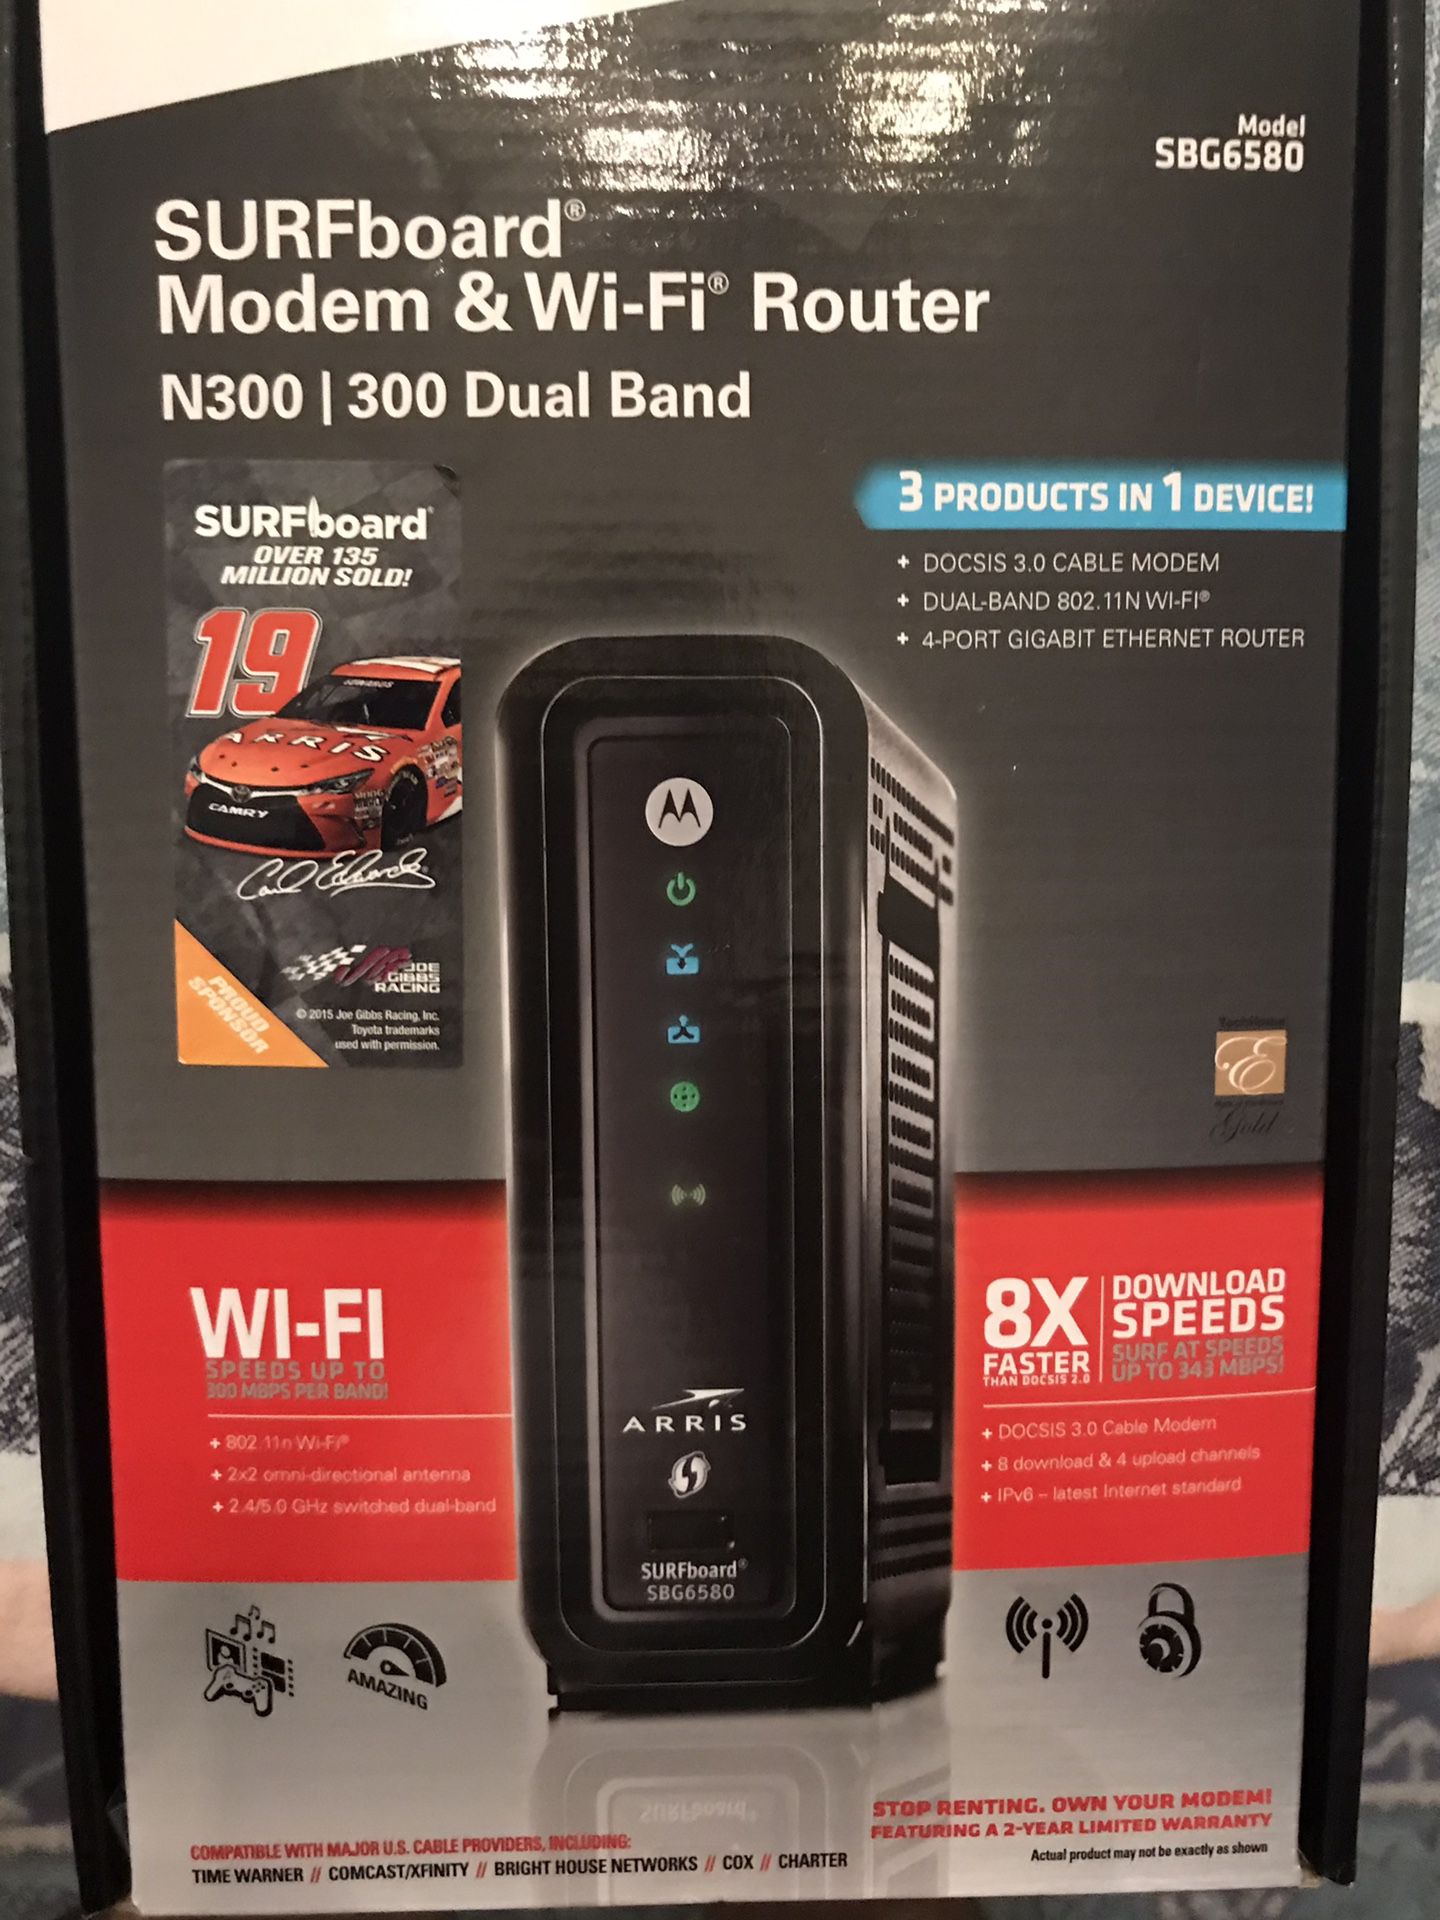 Motorola Arris Modem and Wi-Fi Router - 4 port gigabyte router